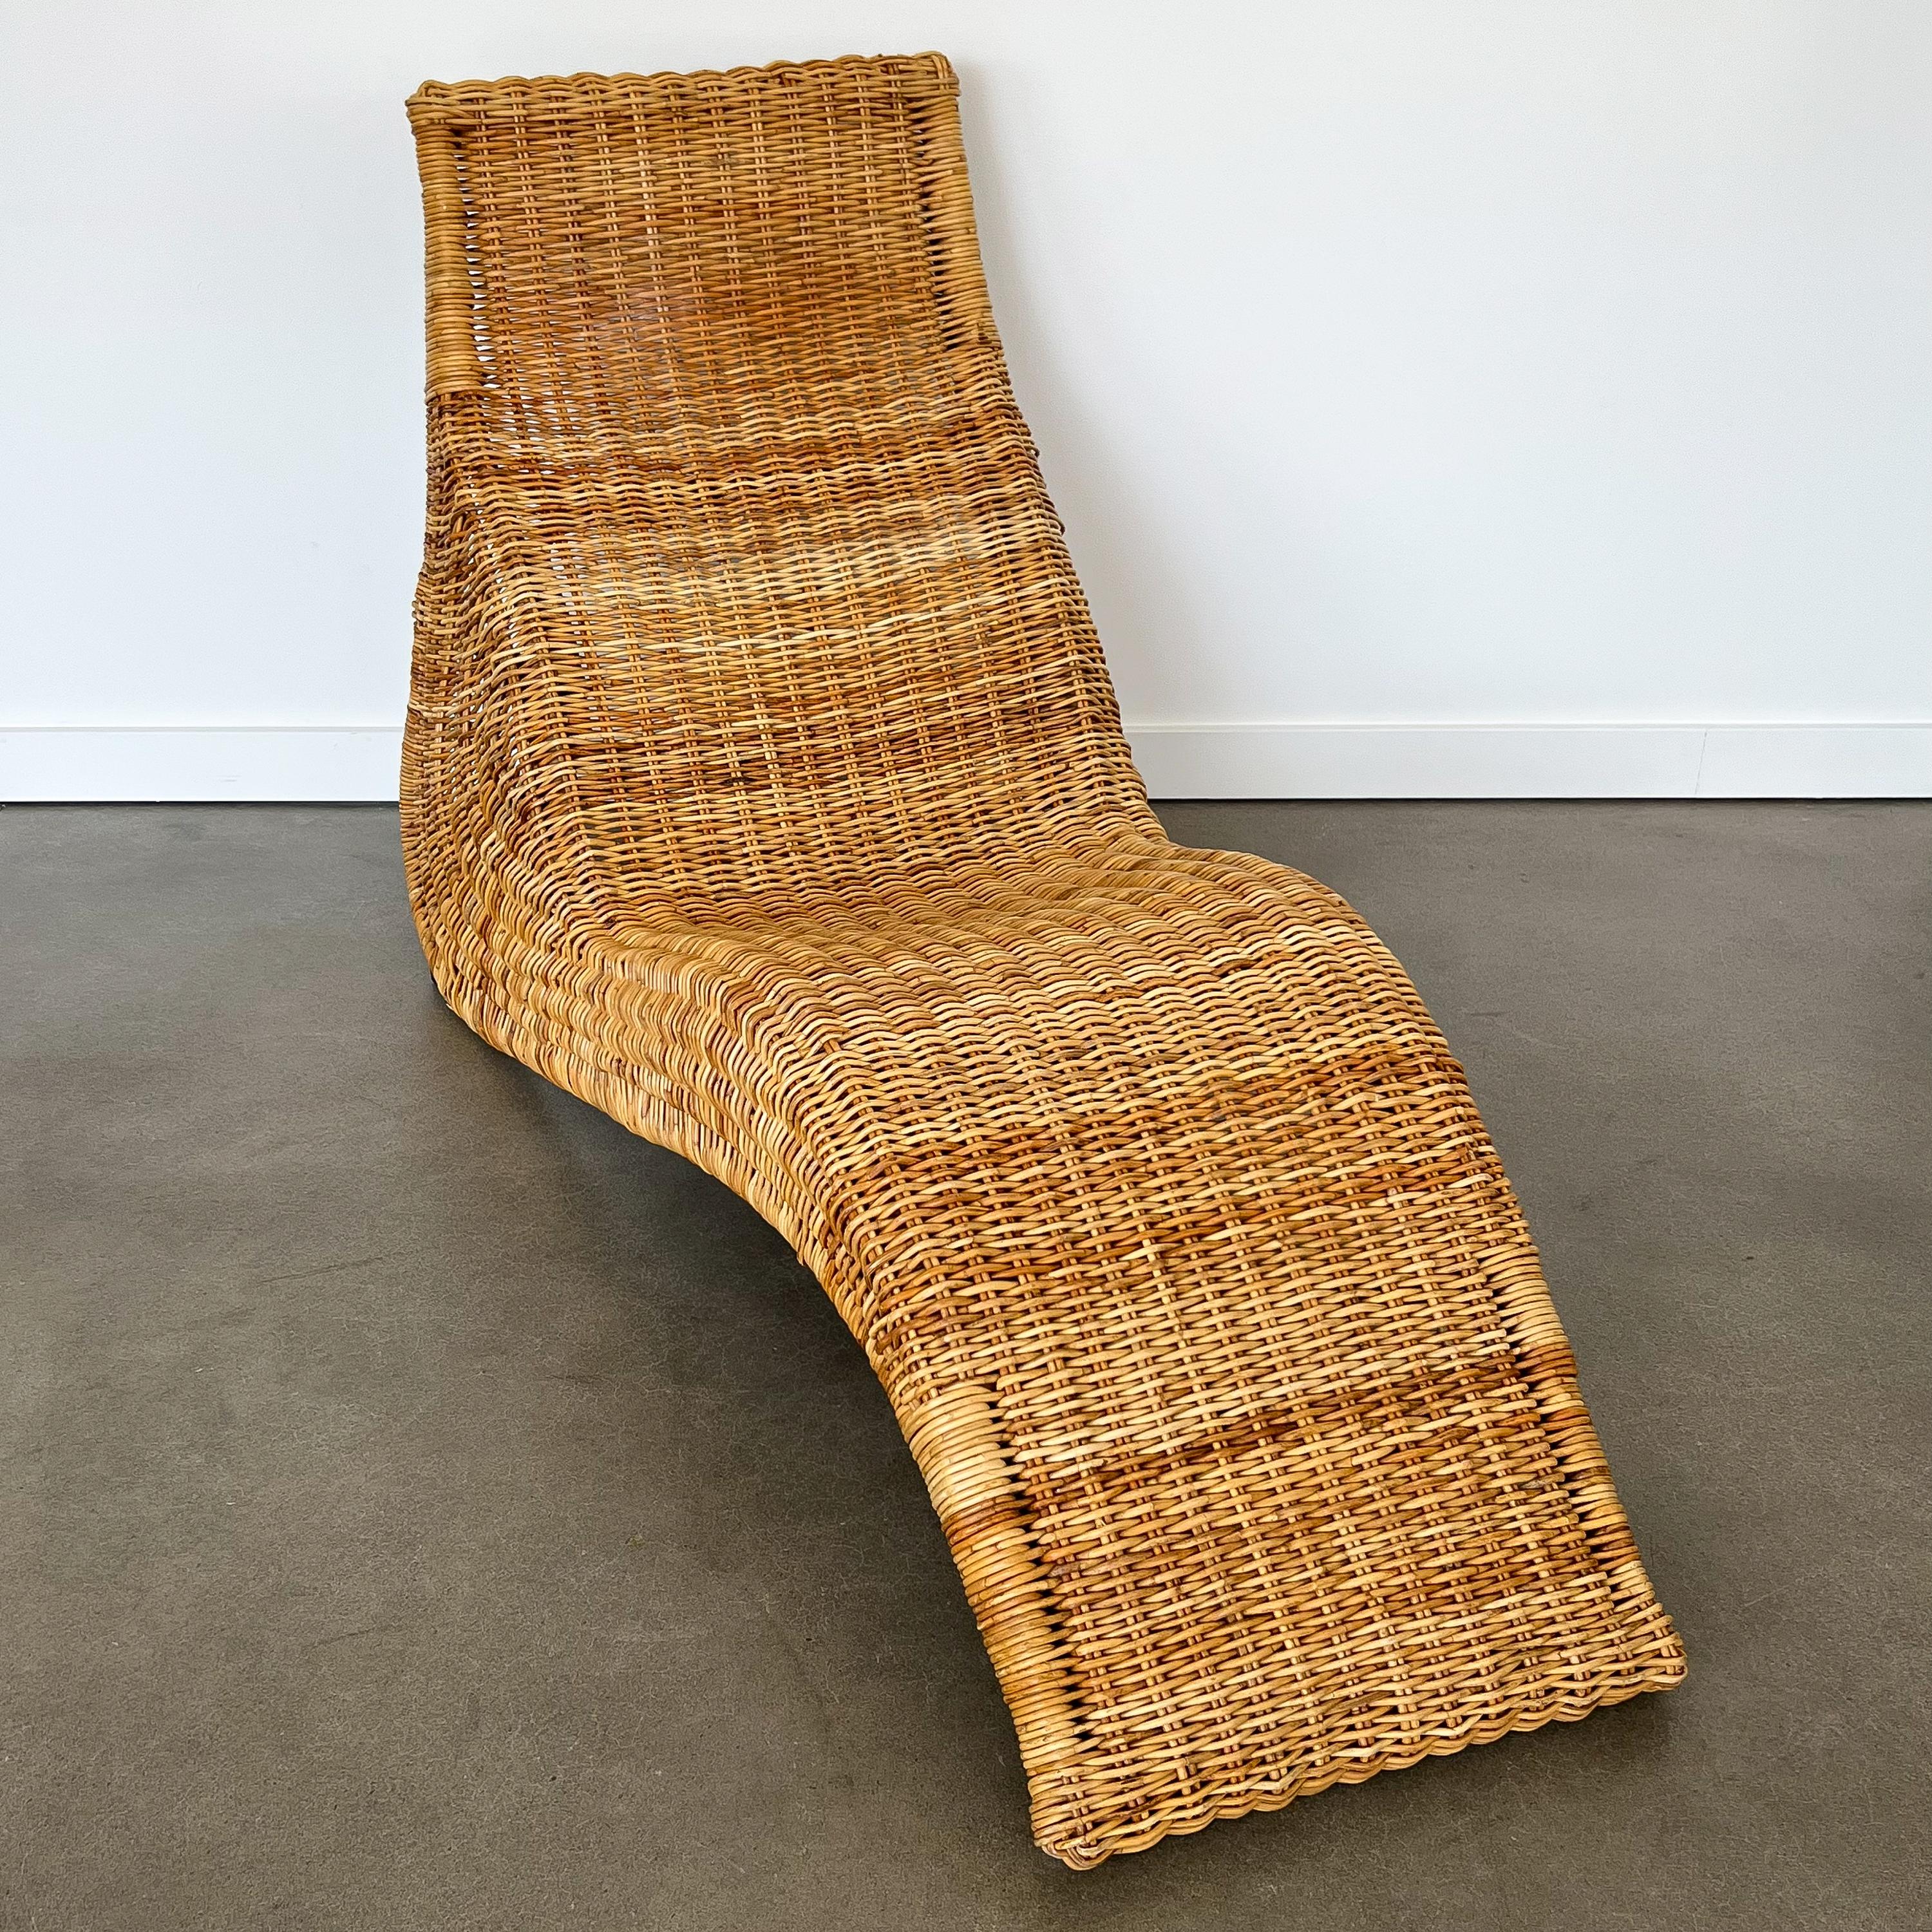 Late 20th Century Karlskrona Rattan Wicker Chaise Lounge by Karl Malmvall for Ikea